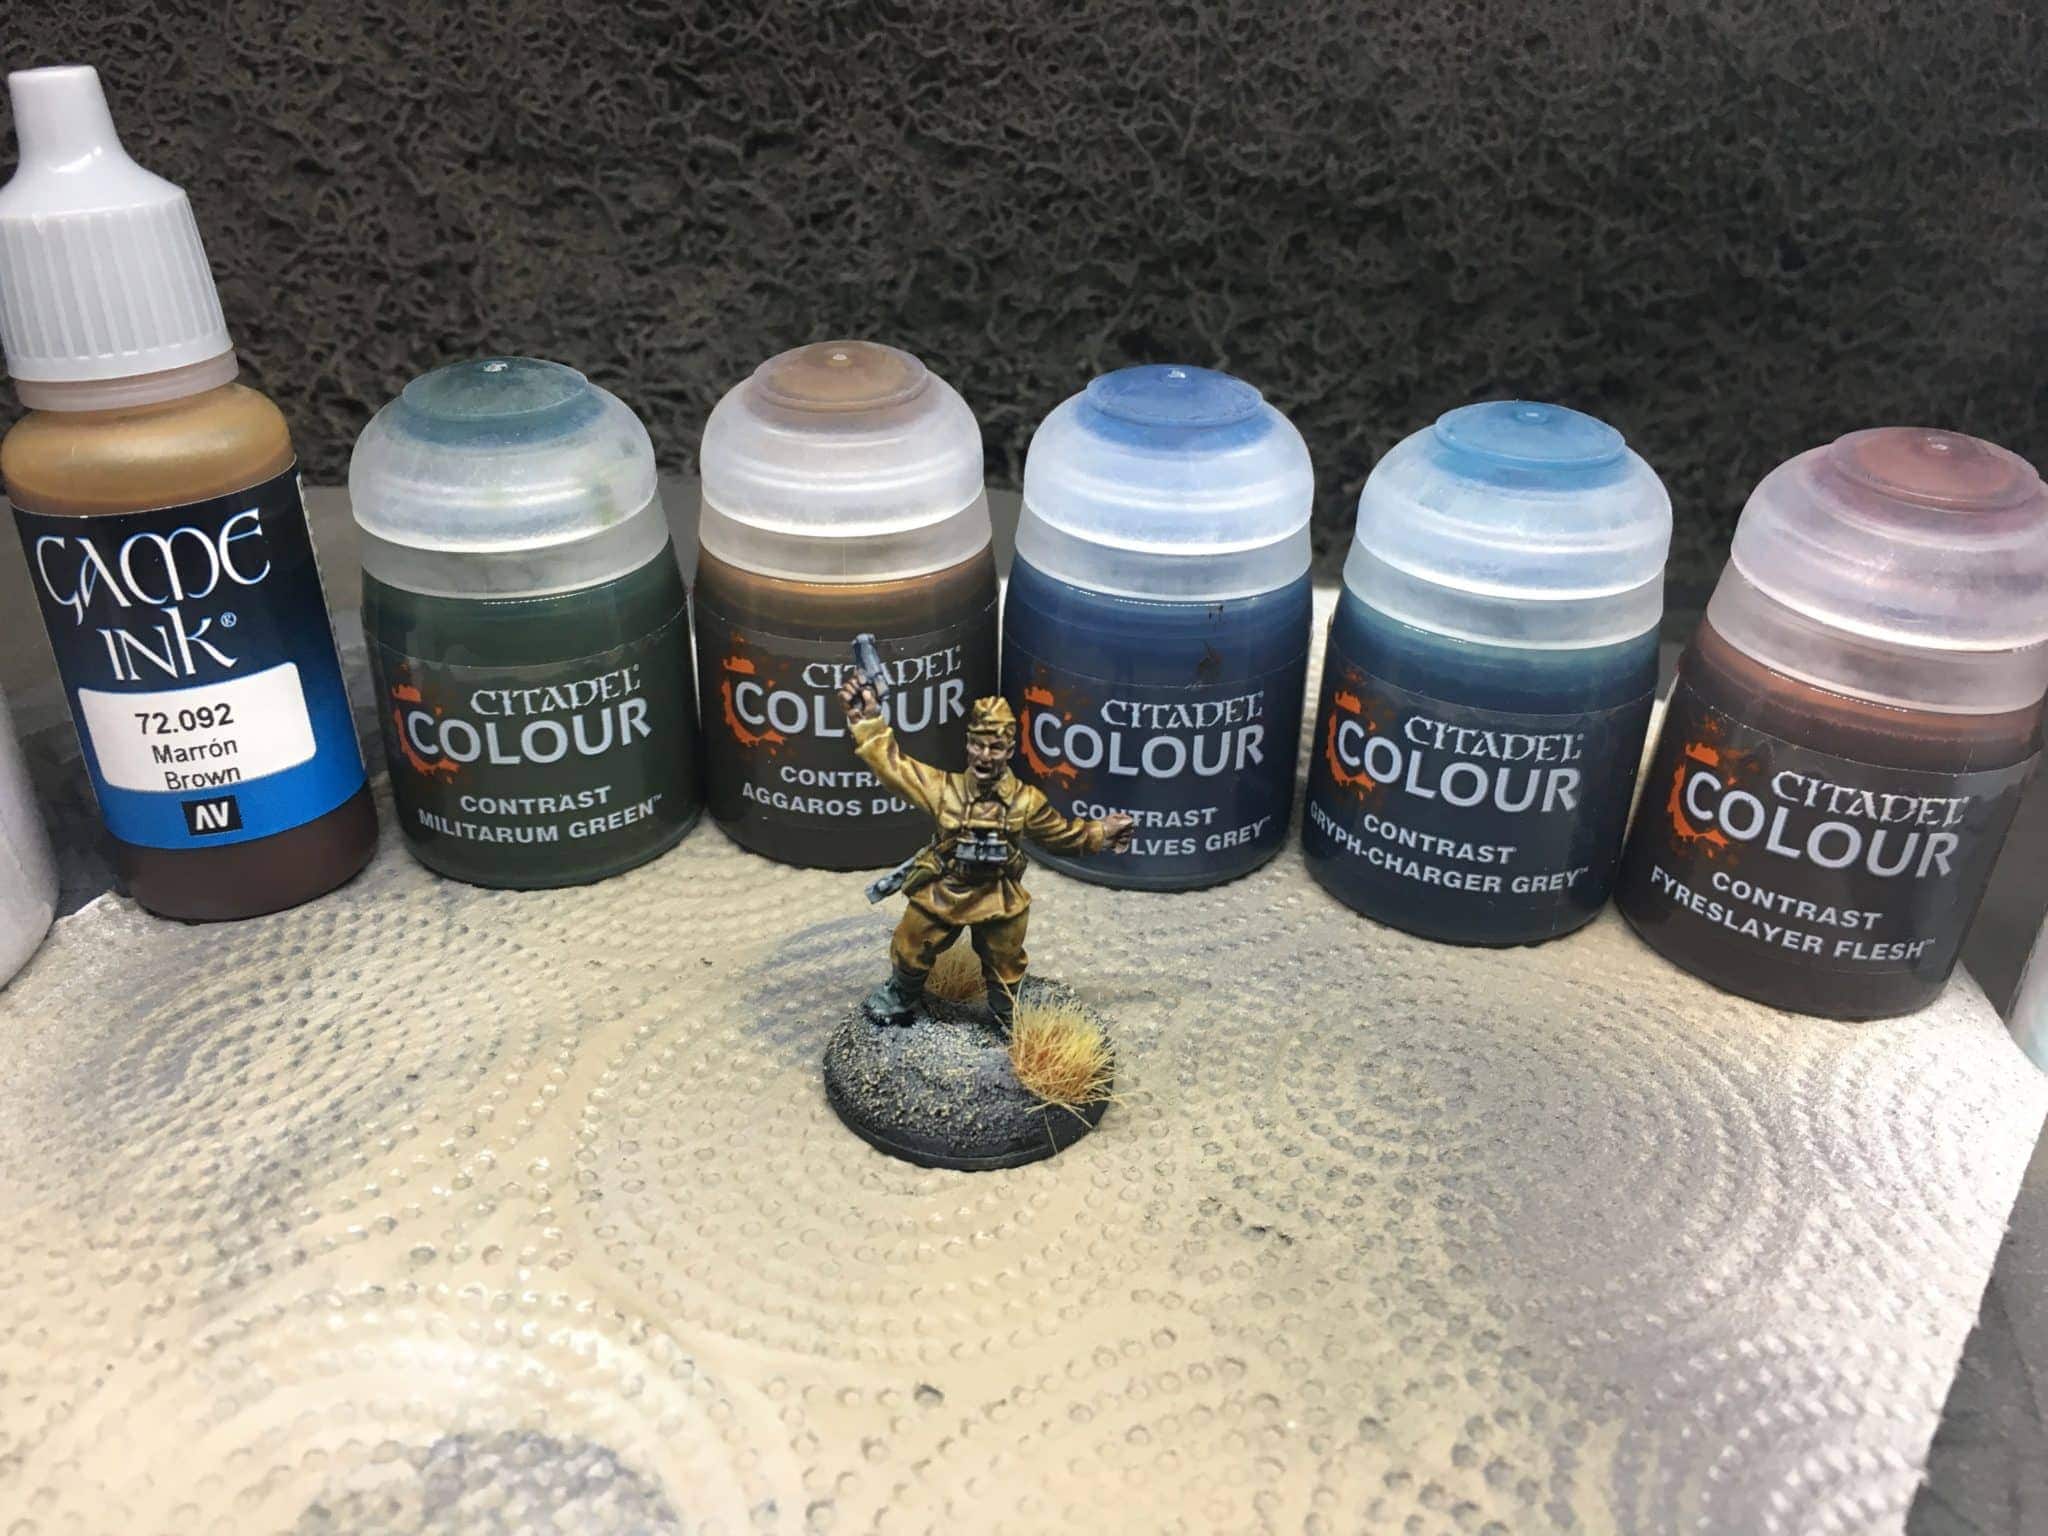 Where's the Contrast? These Citadel Contrast Paints are Flat